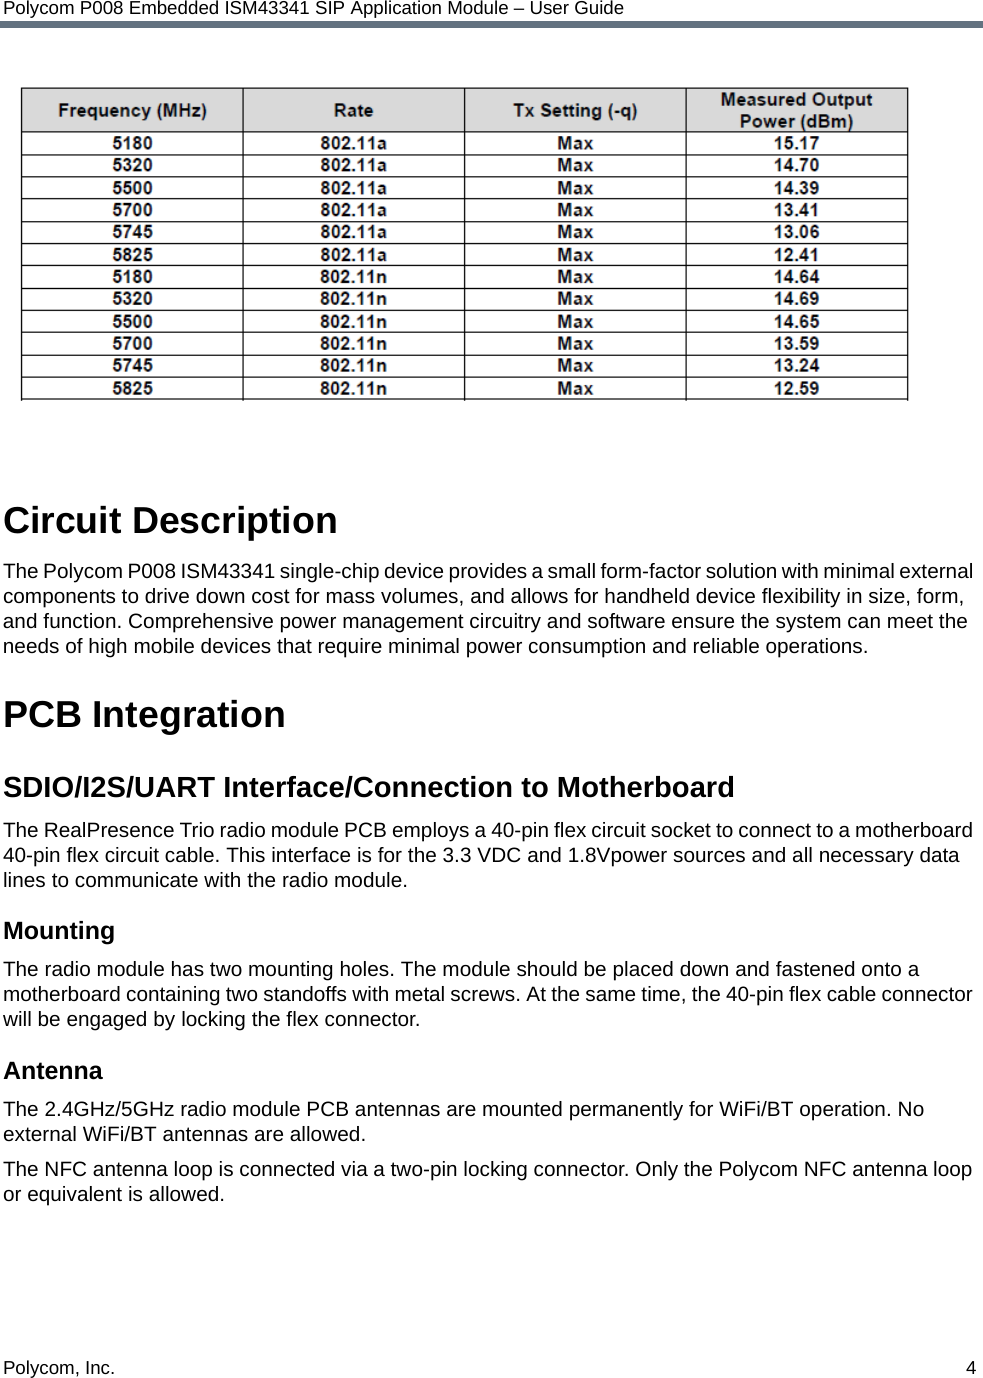 Polycom, Inc.  4Polycom P008 Embedded ISM43341 SIP Application Module – User GuideCircuit DescriptionThe Polycom P008 ISM43341 single-chip device provides a small form-factor solution with minimal external components to drive down cost for mass volumes, and allows for handheld device flexibility in size, form, and function. Comprehensive power management circuitry and software ensure the system can meet the needs of high mobile devices that require minimal power consumption and reliable operations.PCB IntegrationSDIO/I2S/UART Interface/Connection to MotherboardThe RealPresence Trio radio module PCB employs a 40-pin flex circuit socket to connect to a motherboard 40-pin flex circuit cable. This interface is for the 3.3 VDC and 1.8Vpower sources and all necessary data lines to communicate with the radio module.MountingThe radio module has two mounting holes. The module should be placed down and fastened onto a motherboard containing two standoffs with metal screws. At the same time, the 40-pin flex cable connector will be engaged by locking the flex connector.AntennaThe 2.4GHz/5GHz radio module PCB antennas are mounted permanently for WiFi/BT operation. No external WiFi/BT antennas are allowed.The NFC antenna loop is connected via a two-pin locking connector. Only the Polycom NFC antenna loop or equivalent is allowed.